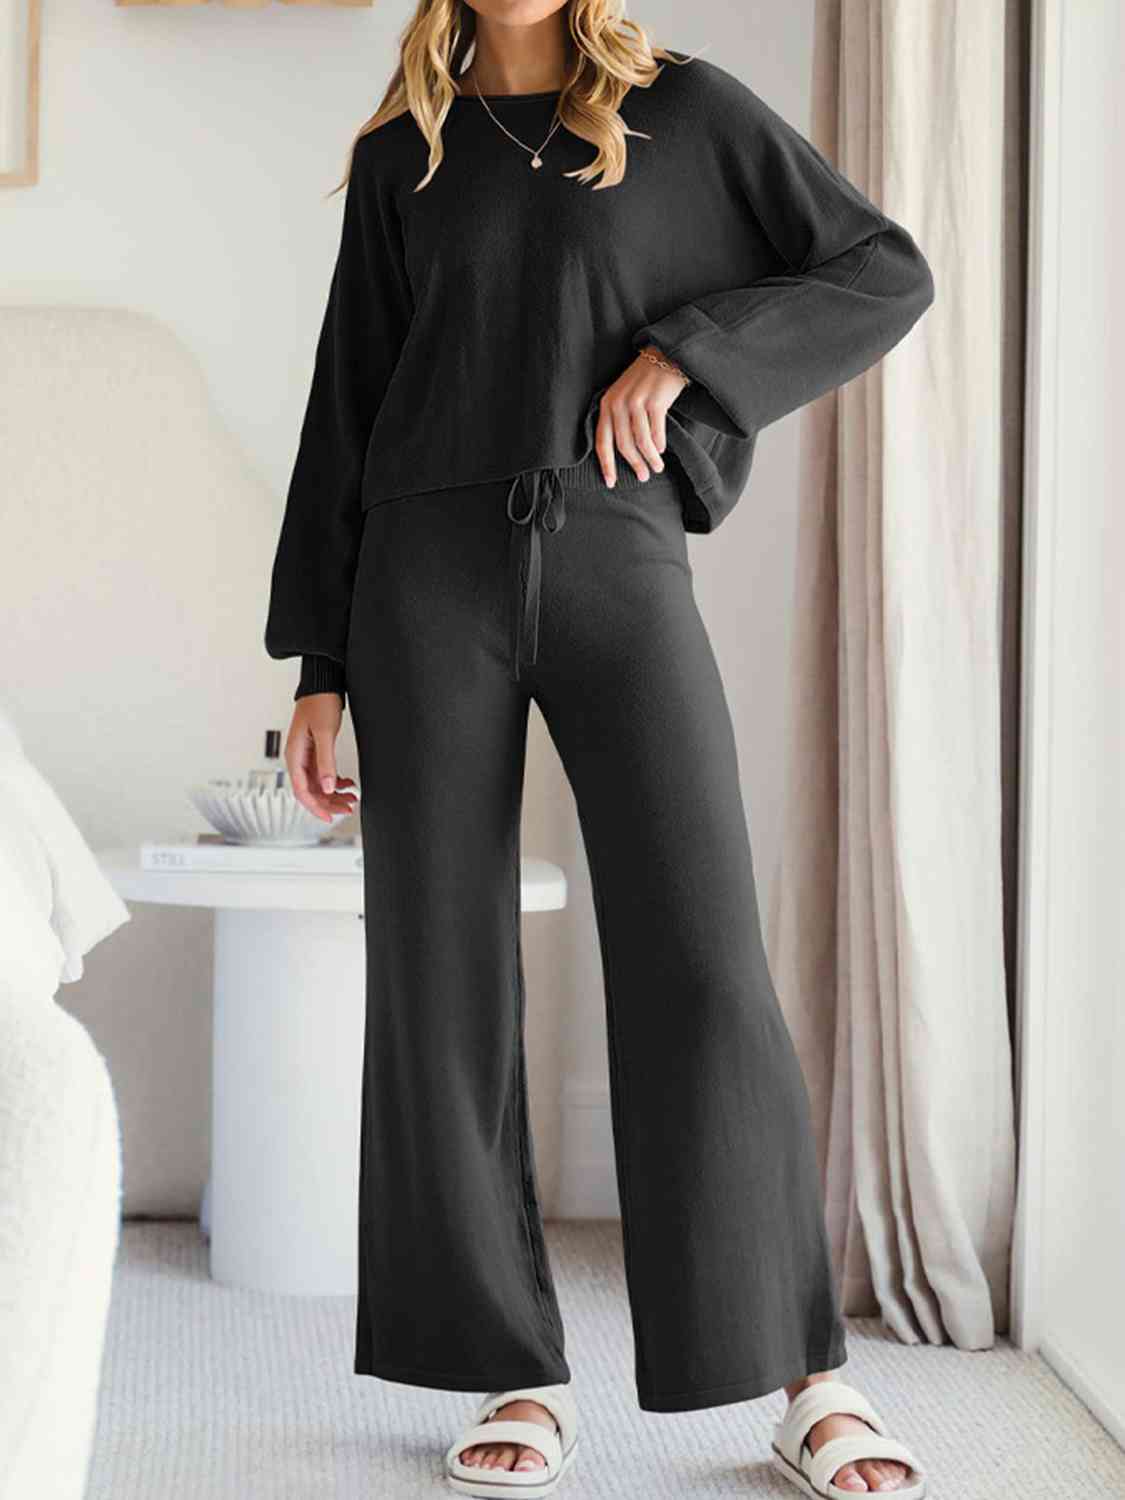 Dark Slate Gray Long Sleeve Lounge Top and Drawstring Pants Set Sentient Beauty Fashions Apparel & Accessories